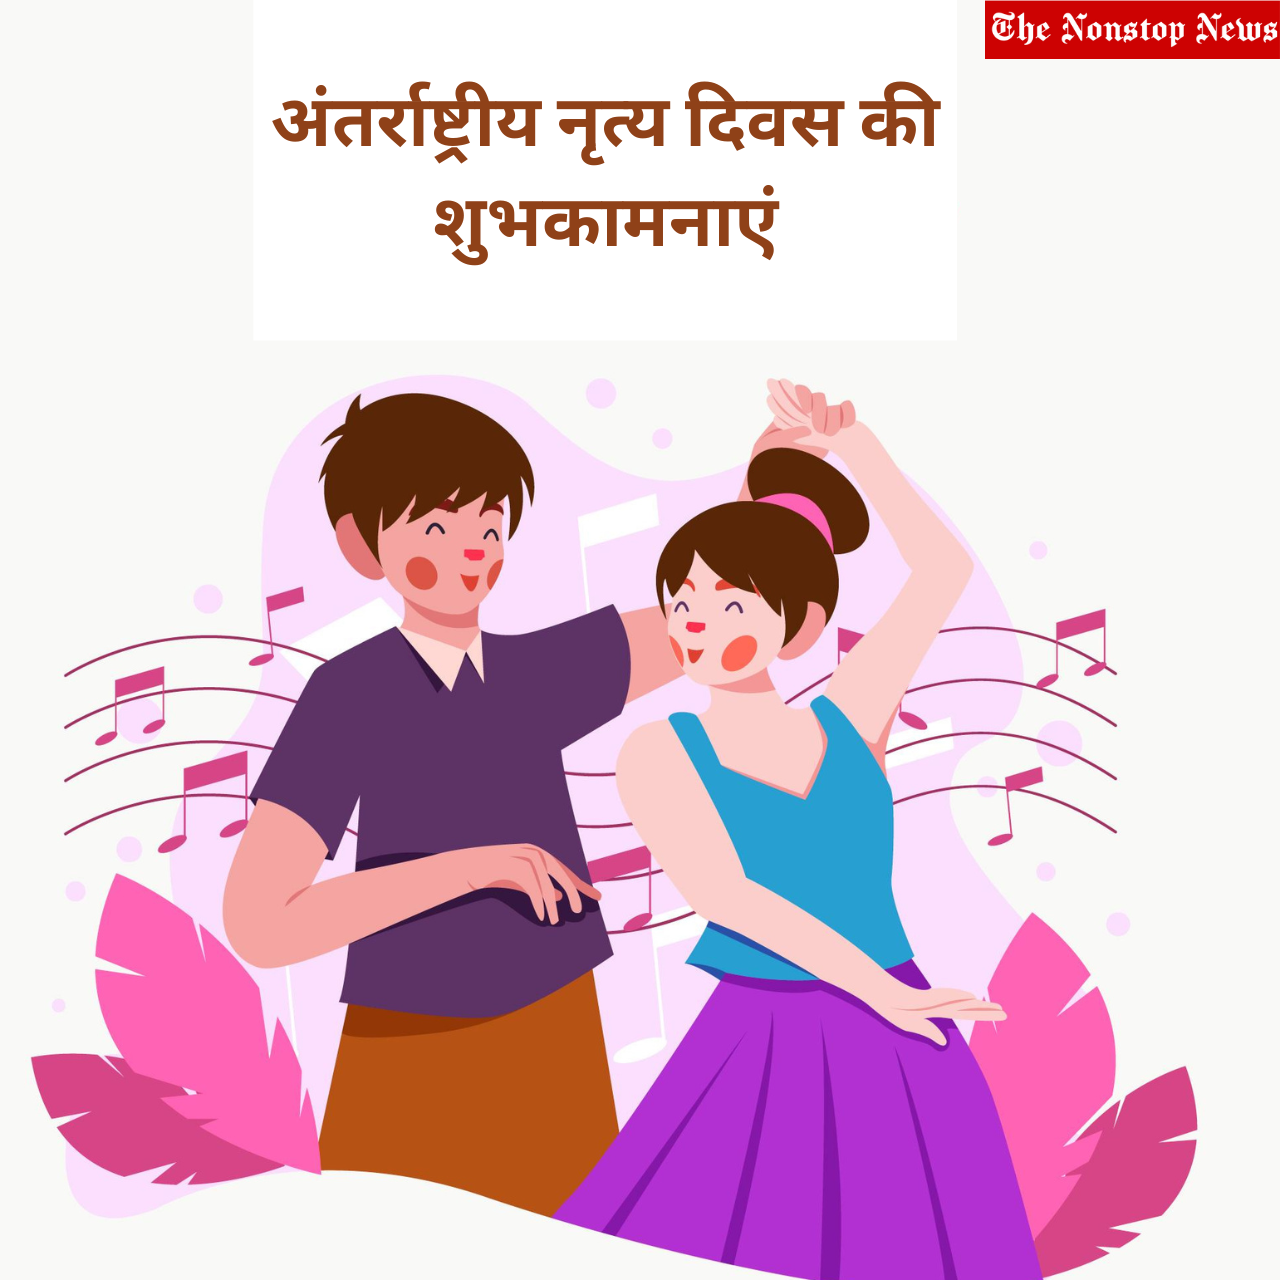 Happy International Dance Day 2023 Hindi Messages, Greetings, Wishes, Quotes, Images, and Sayings